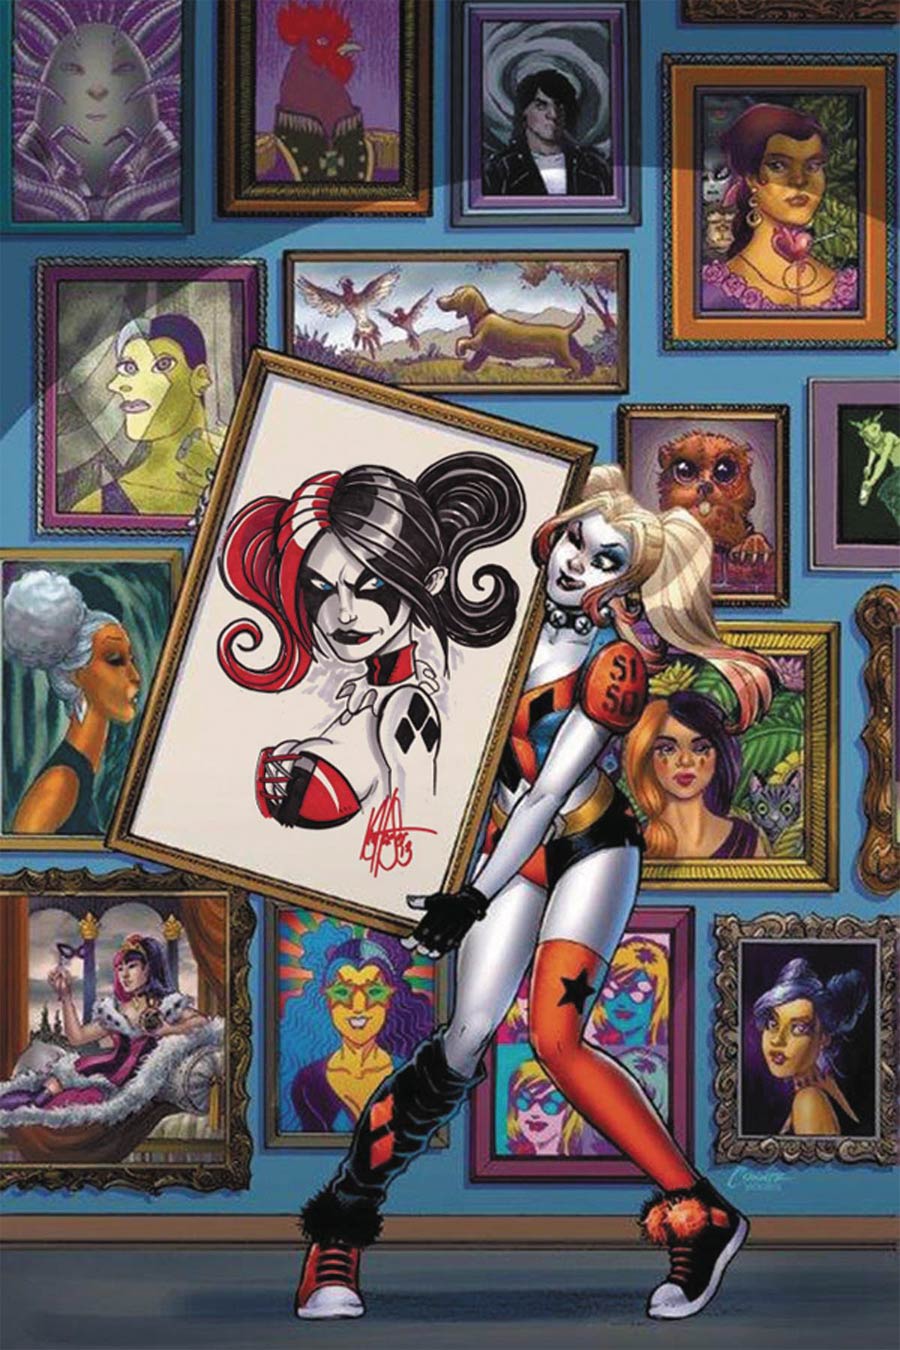 Harley Quinn And Her Gang Of Harleys #1 Cover E DF Amanda Conner Fill In The Frame Variant Cover Signed & Frank Tieri & Remarked By Ken Haeser